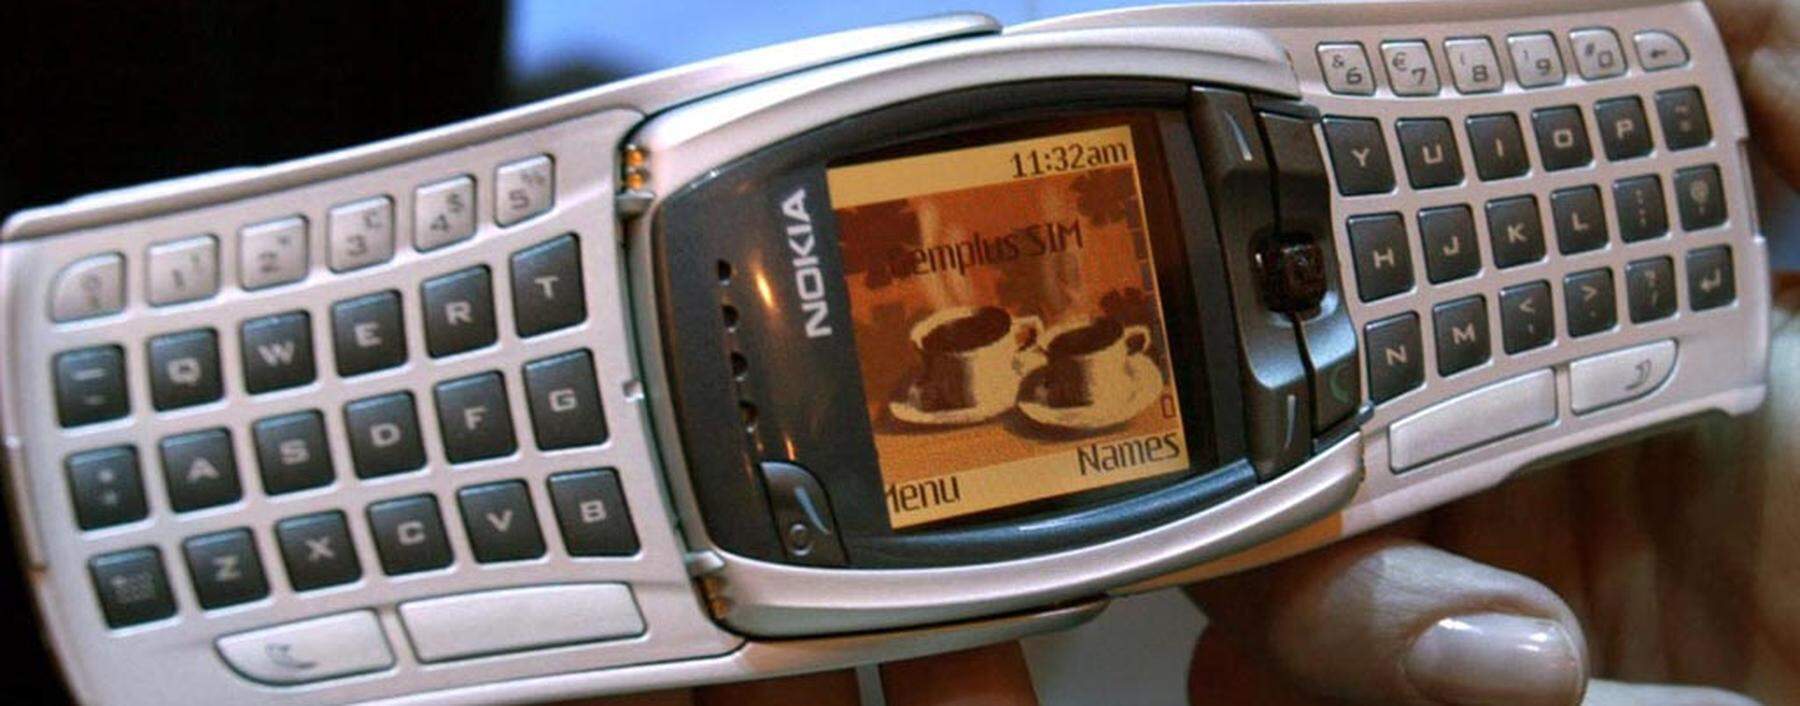 Phone maker Nokia showed off their new 6800 mobile phone November 18, 2002 at COMDEX in Las Vegas. T..